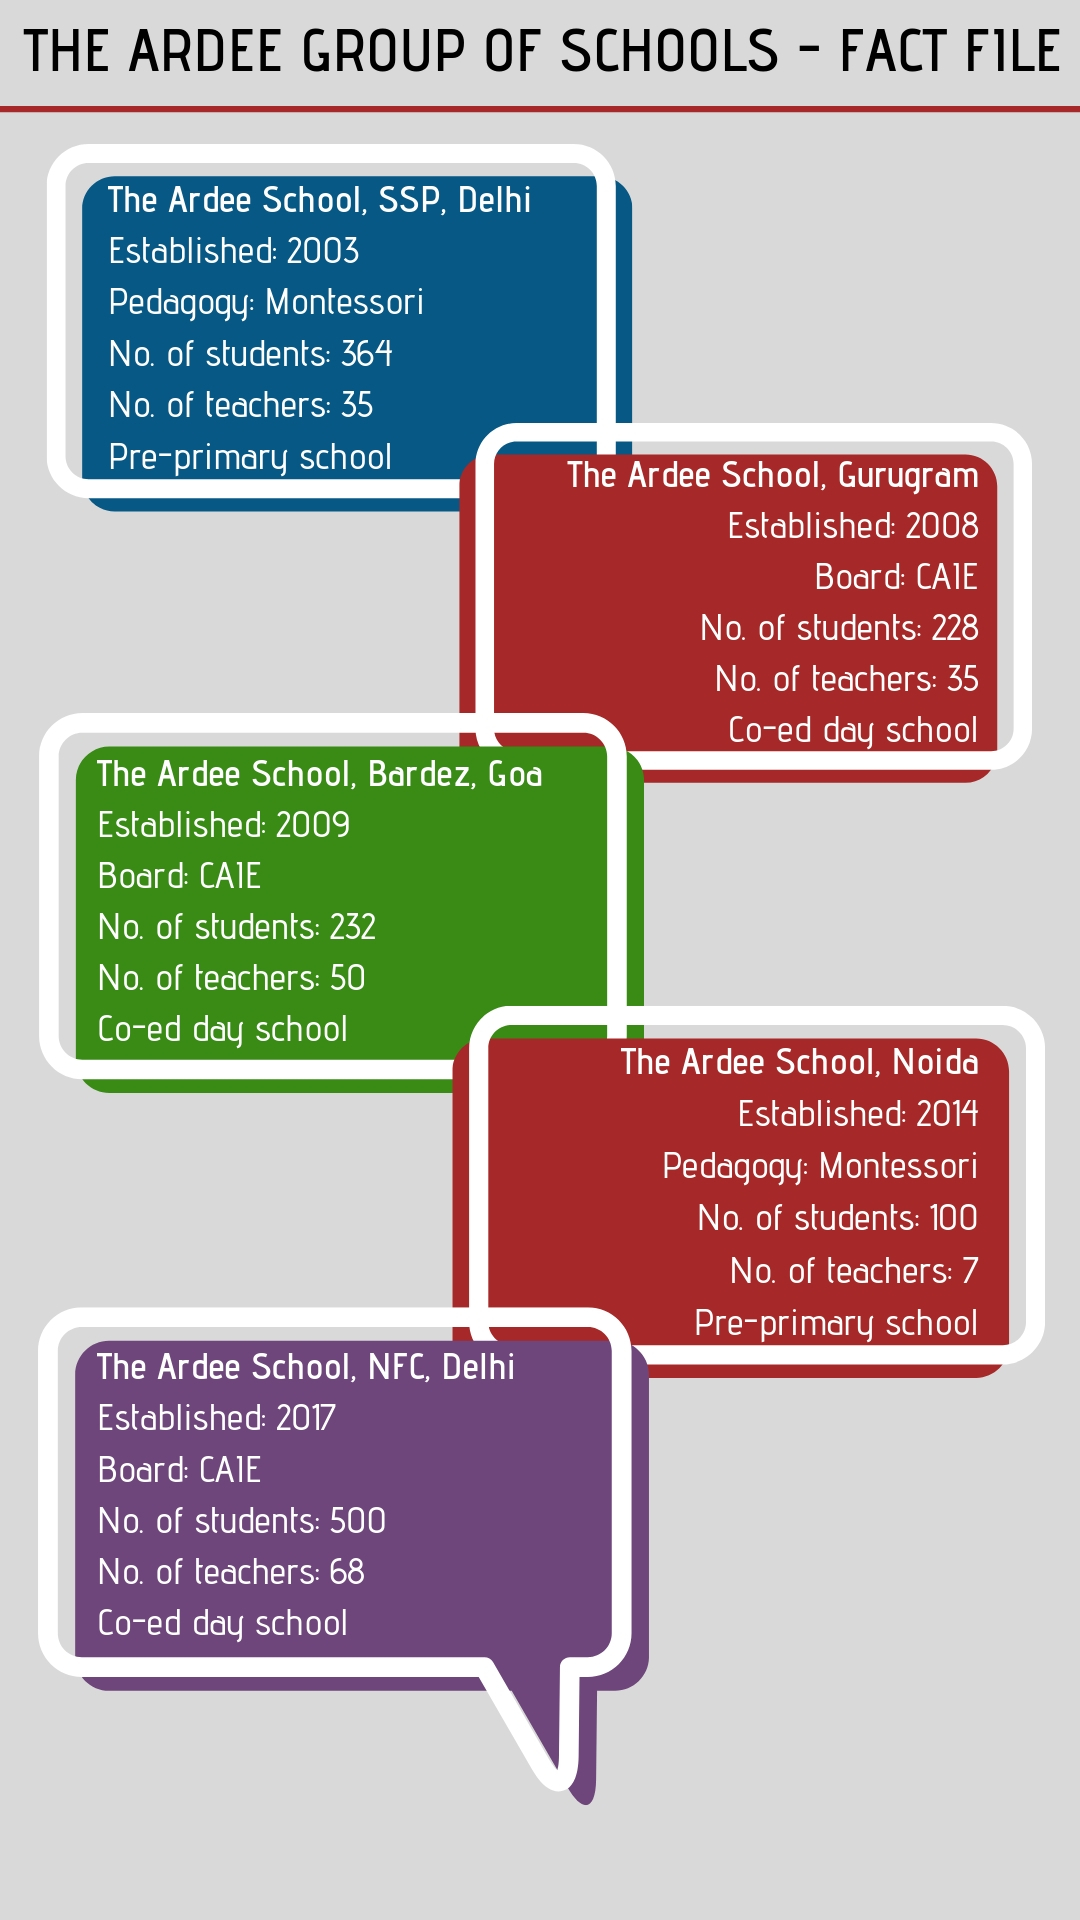 Ardee Group of Schools Fact File